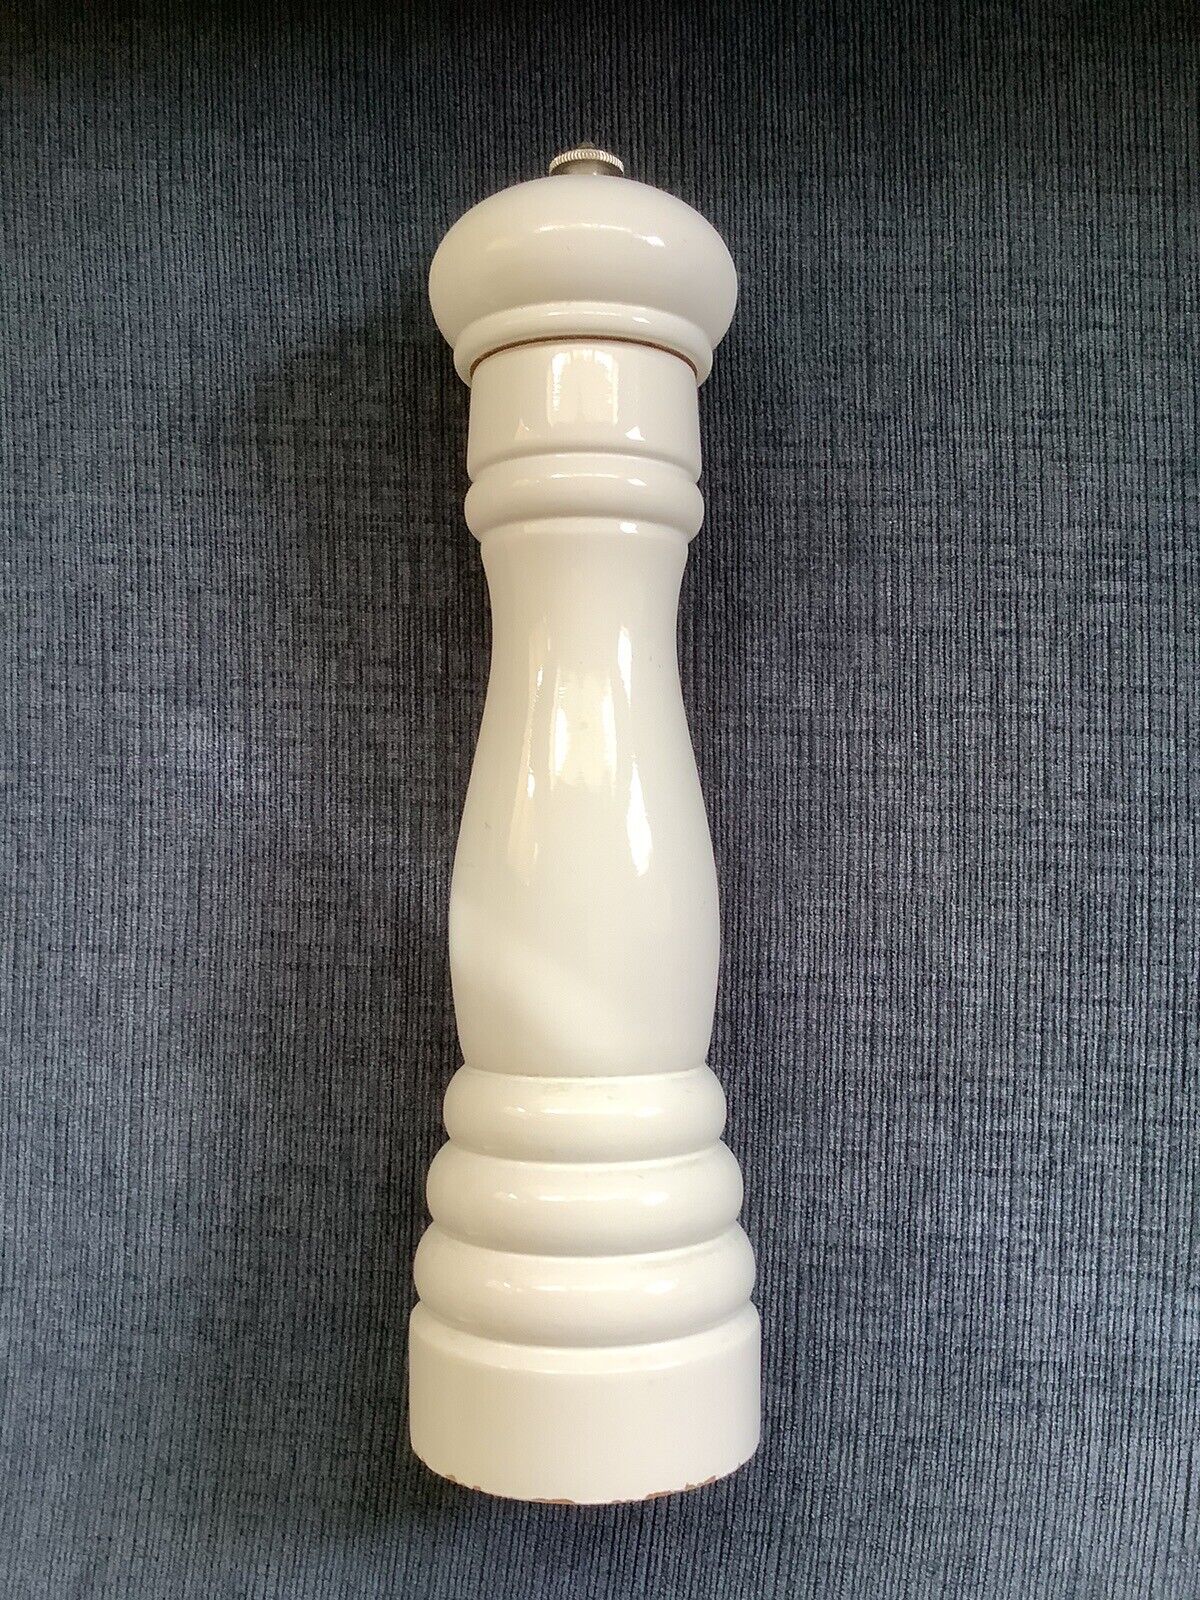 Peugeot Lion France Pepper Mill Grinder White 10.25 Inches Tested